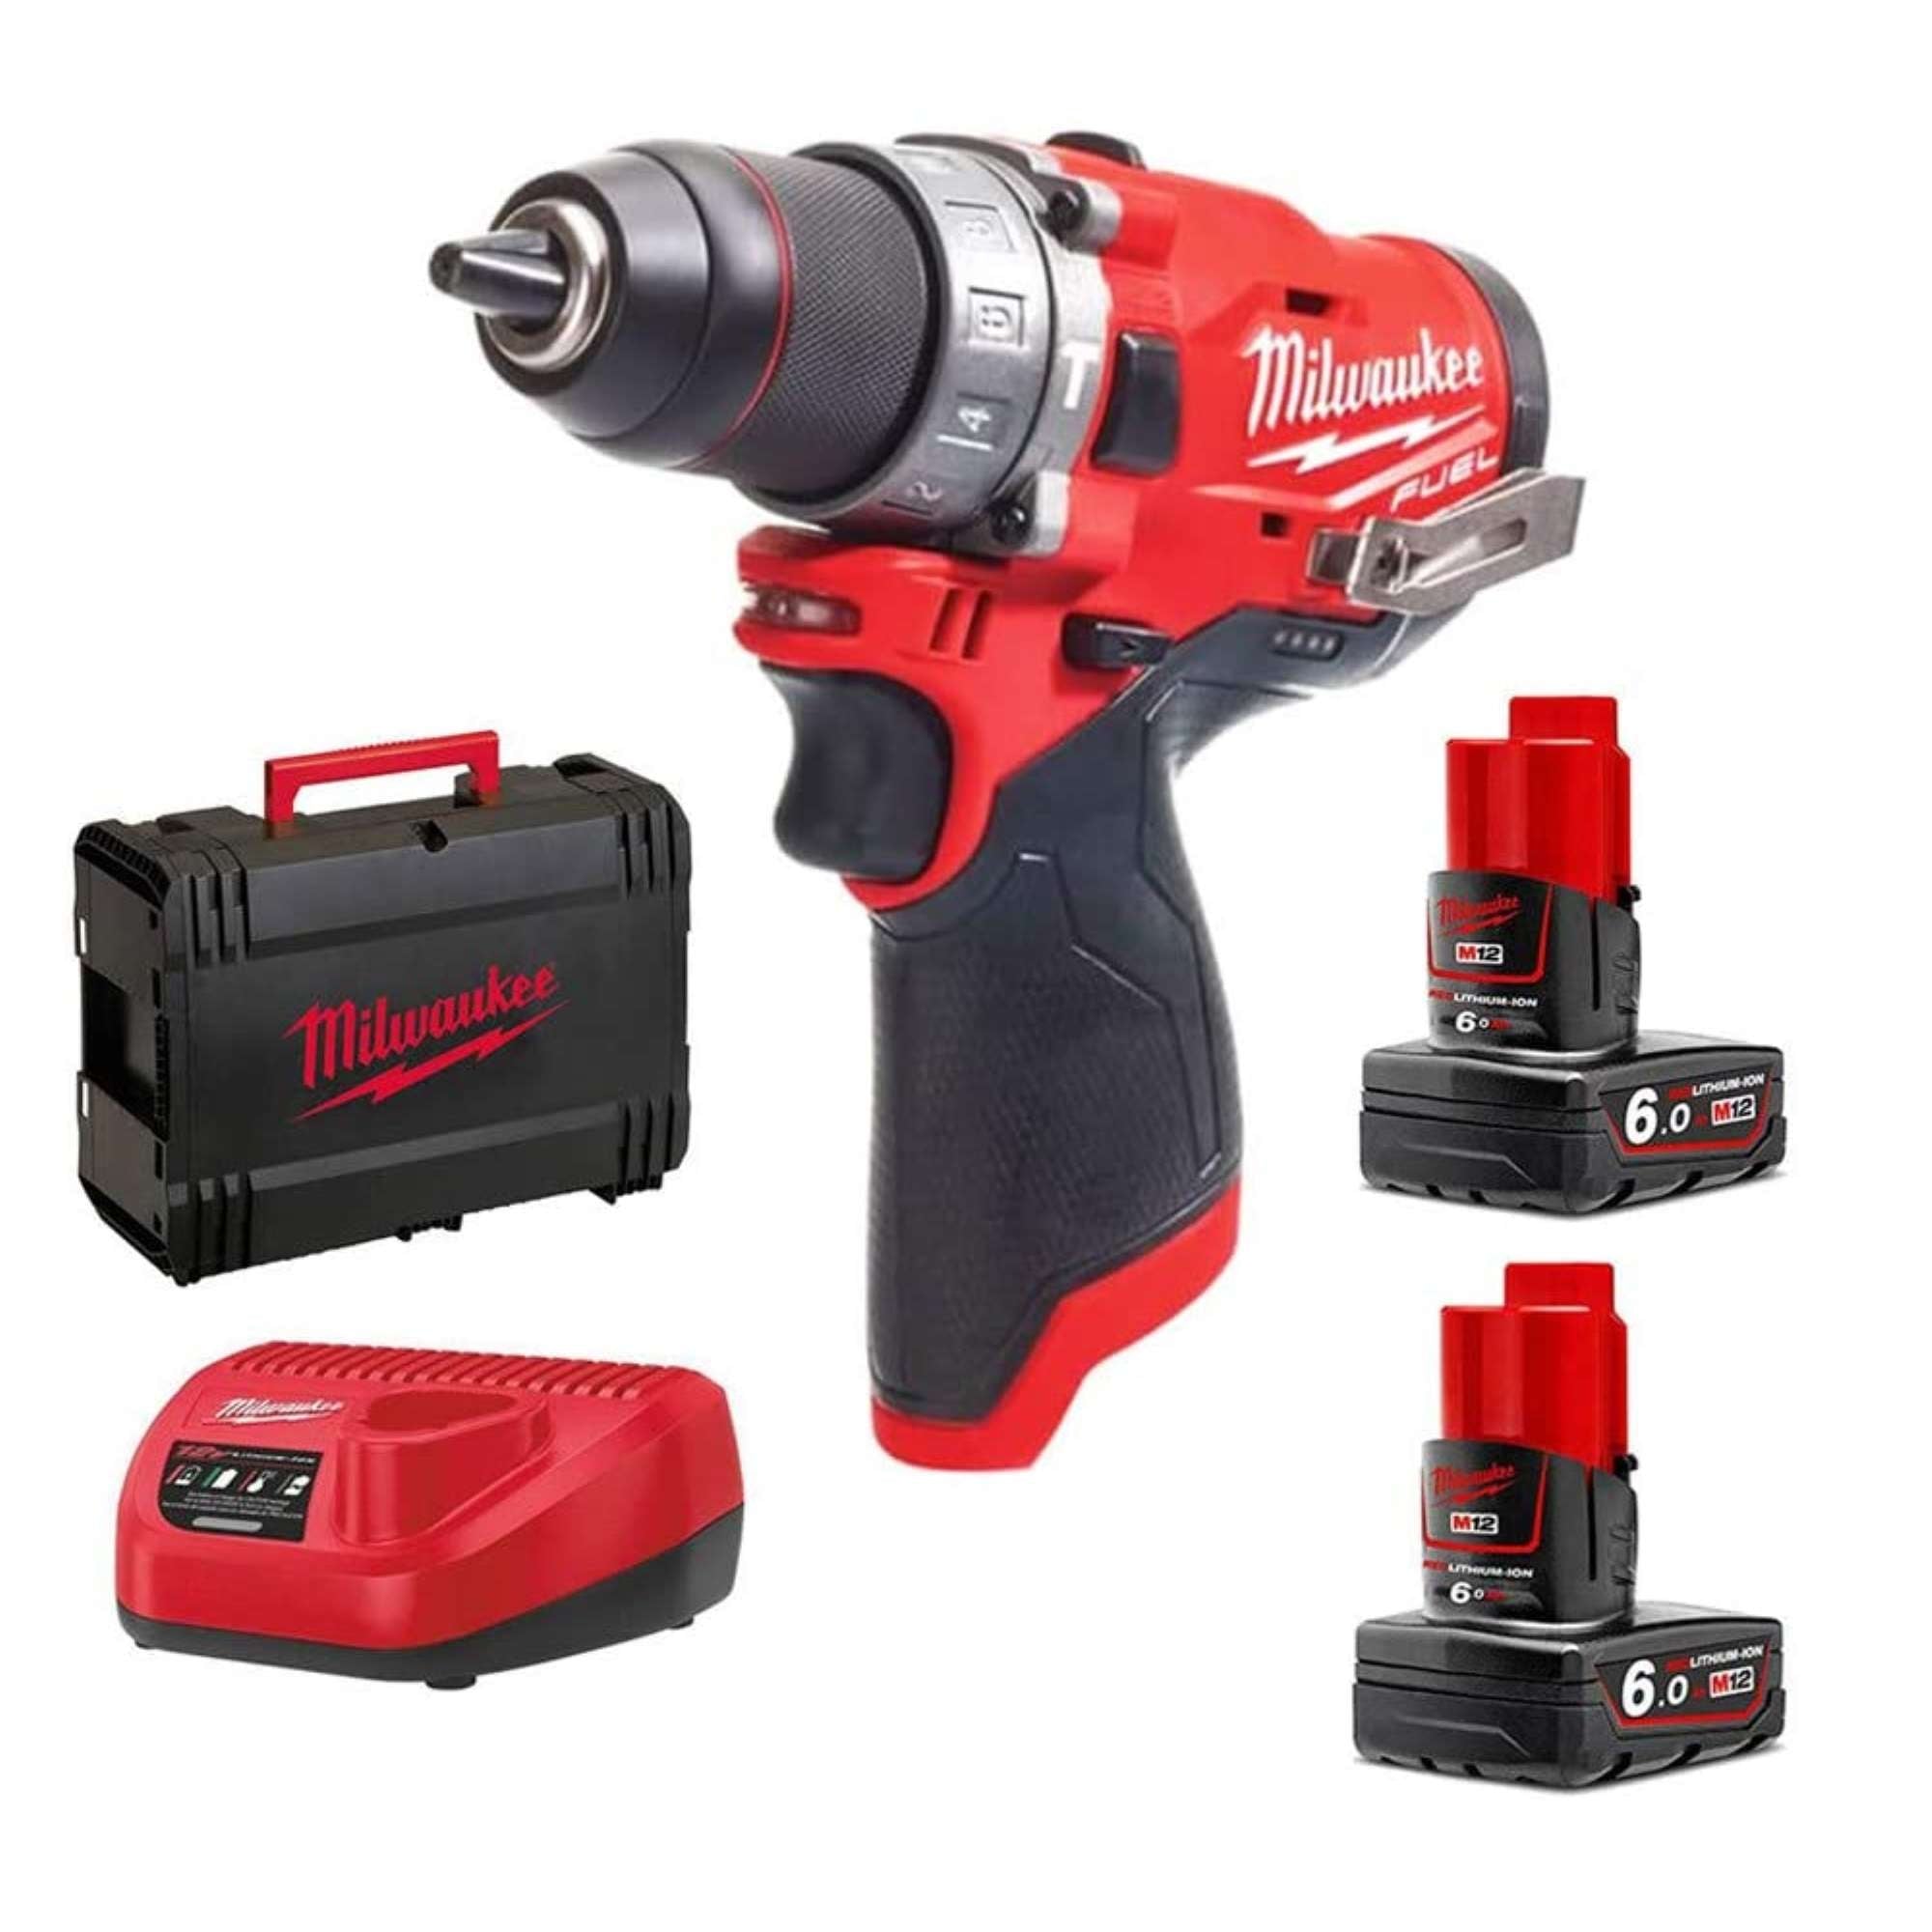 Trapano a percussione 12V + 2 batterie 6.0Ah - MILWAUKEE 4933459806